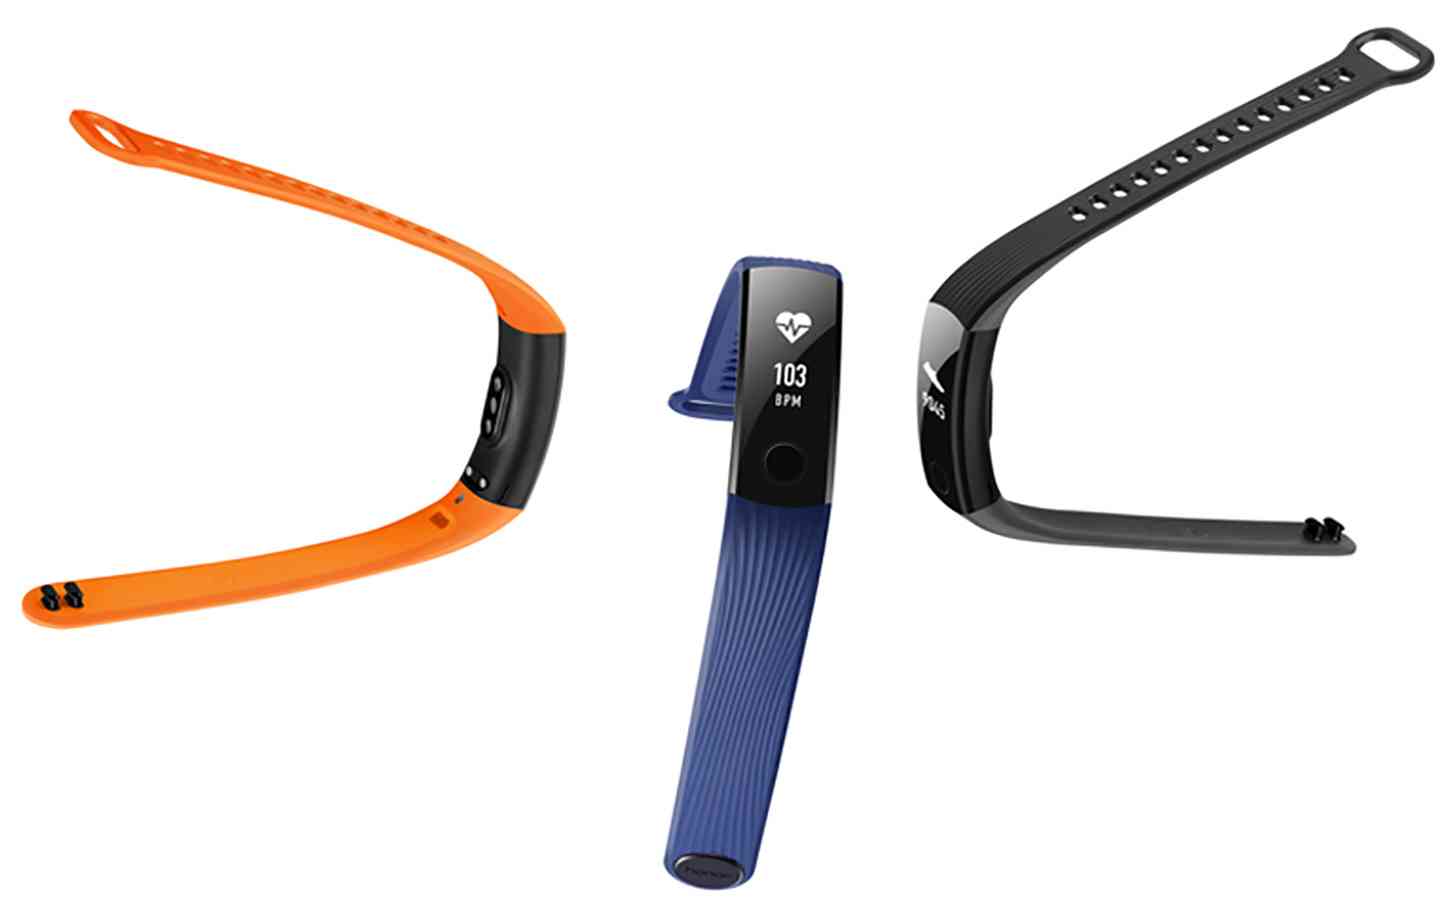 Introducing New Honor Band 3 Fitness Tracker With More Features